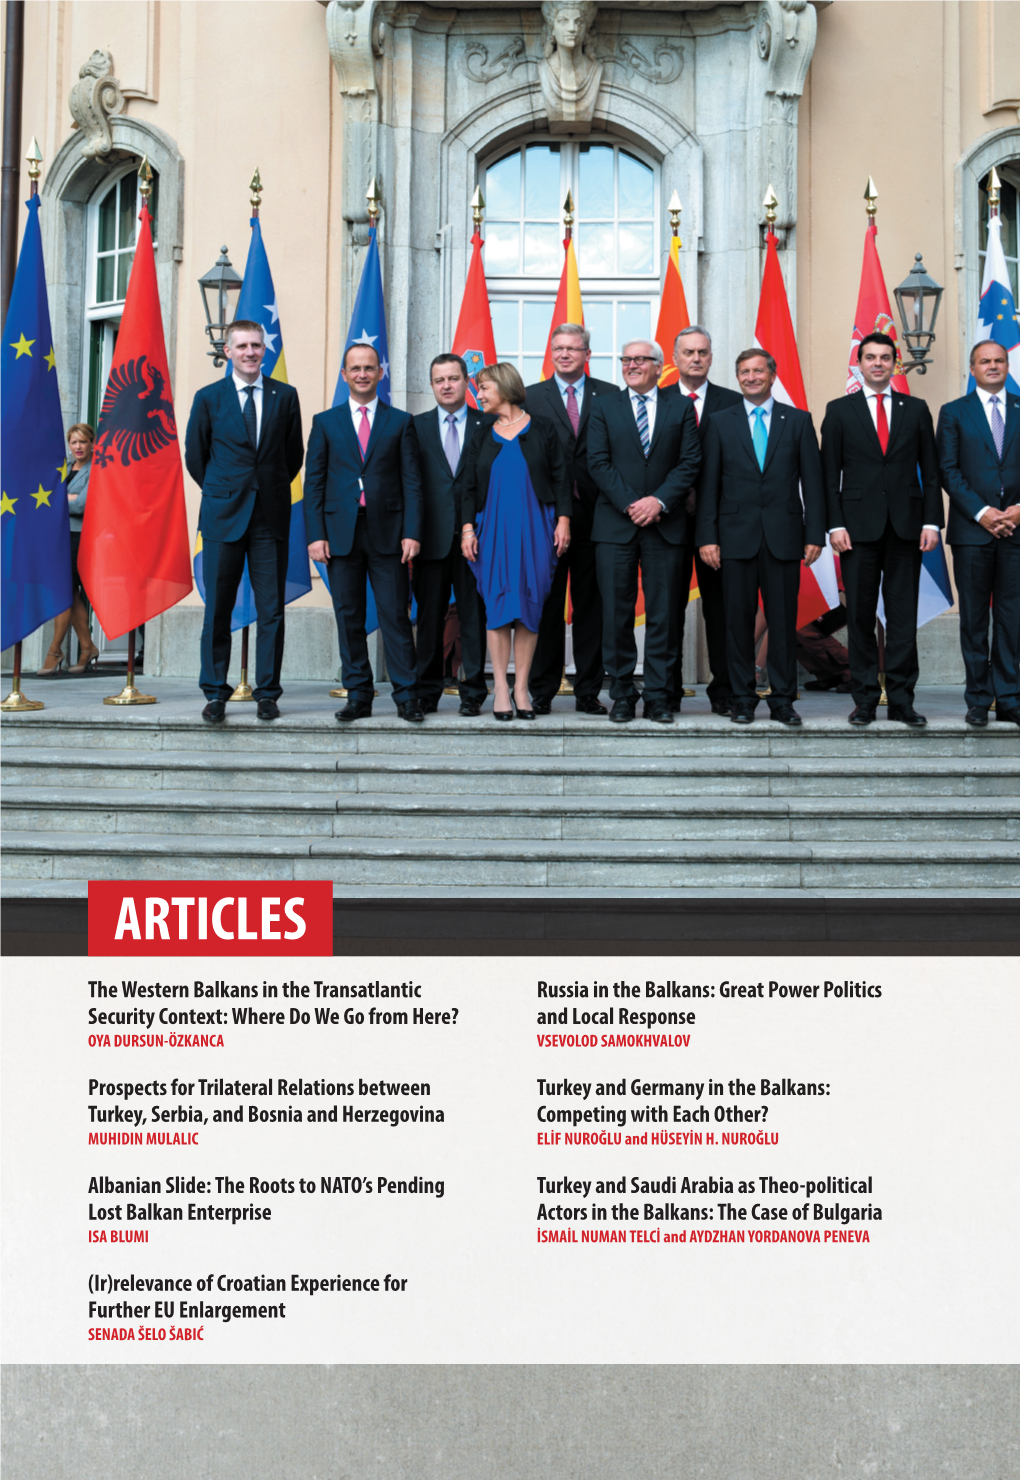 The Western Balkans in the Transatlantic Security Context: Where Do We Go from Here?